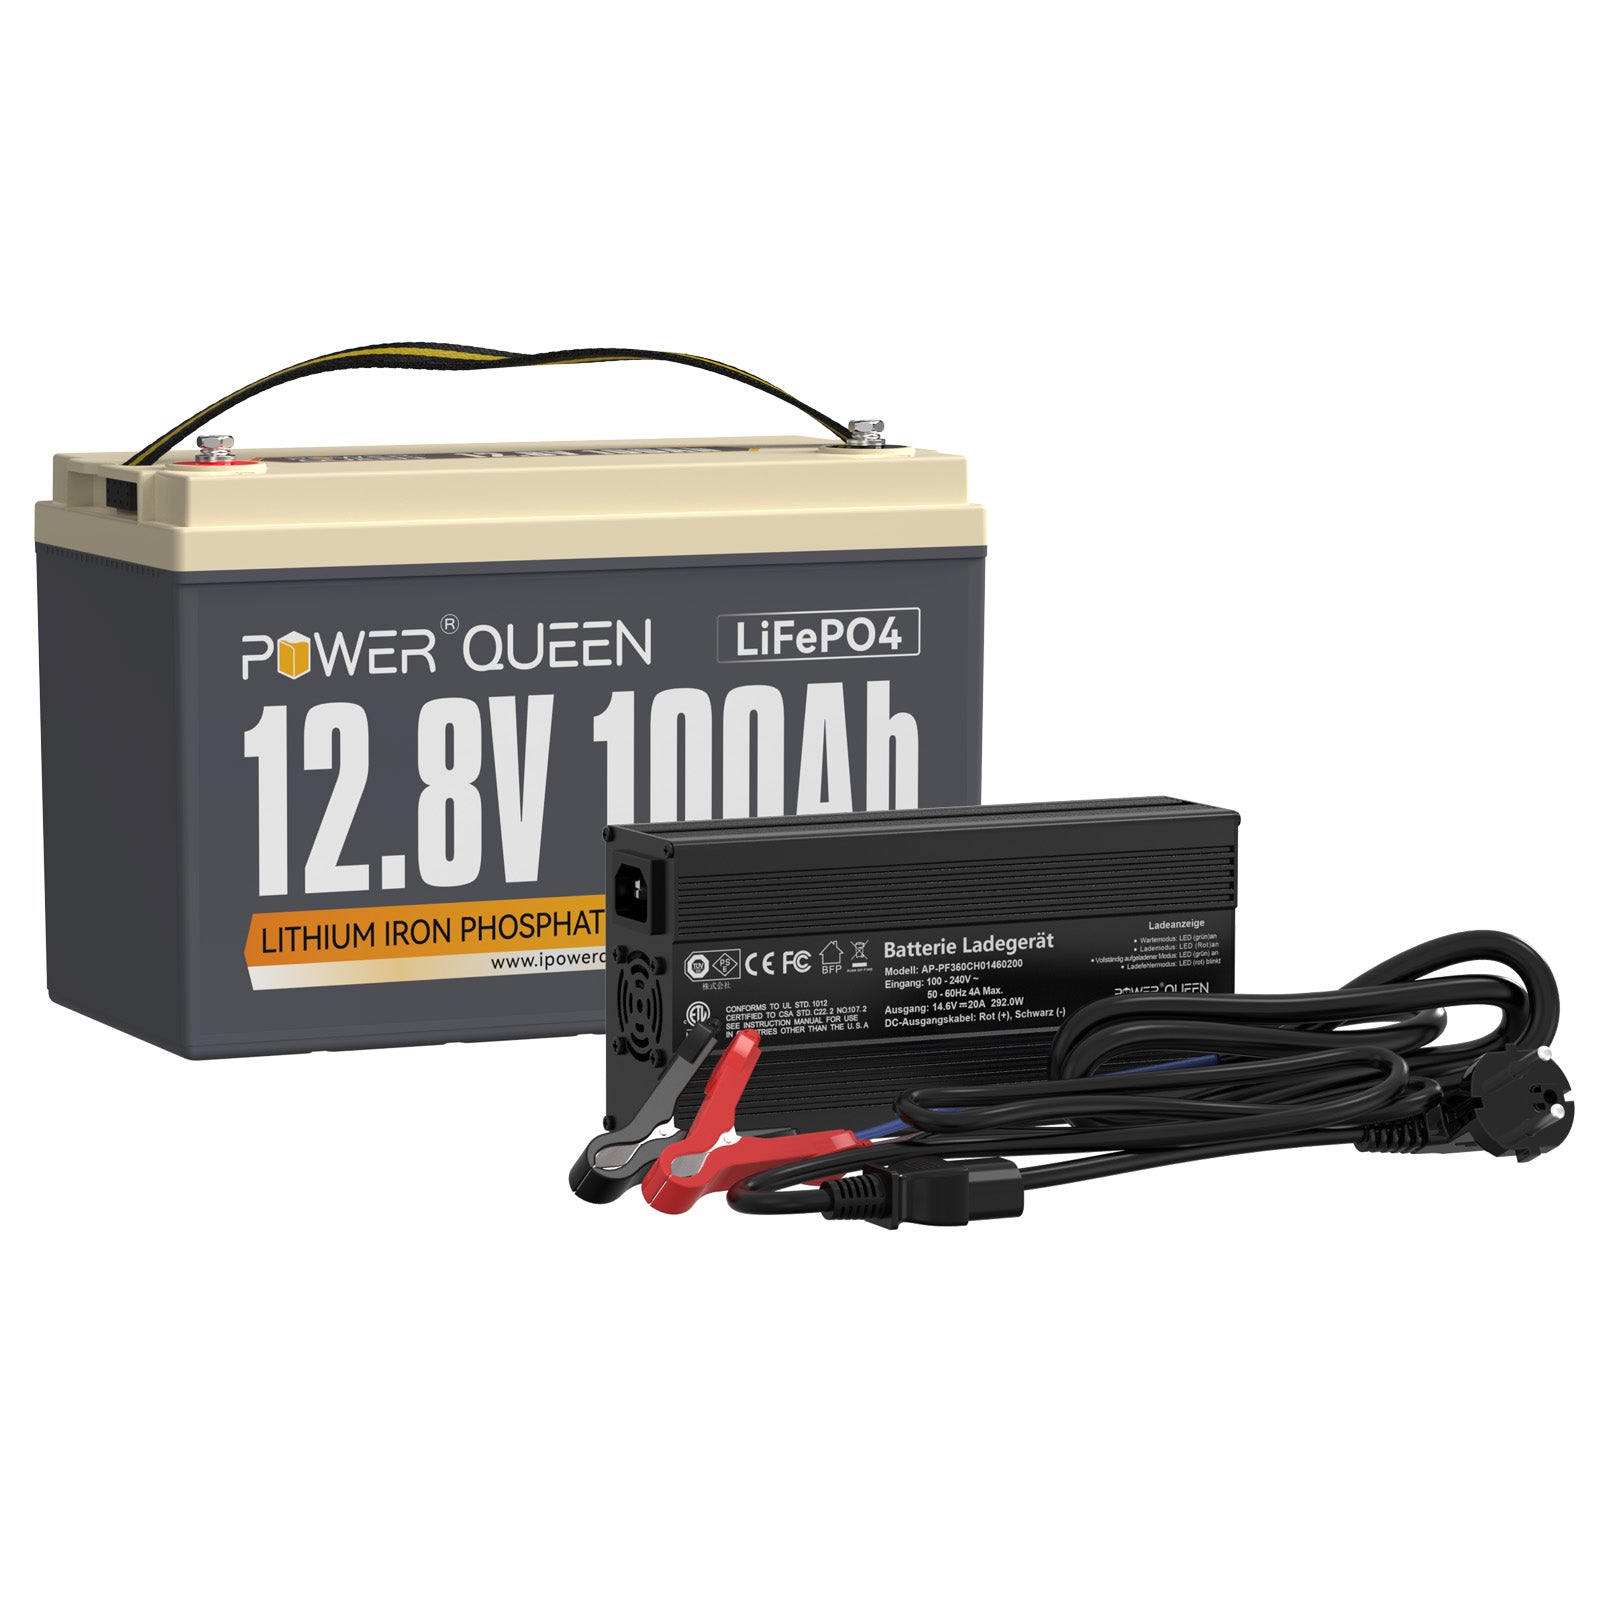 Power Queen 12,8V 100Ah LiFePO4 accu met 14,6V 20A LiFePO4 lader